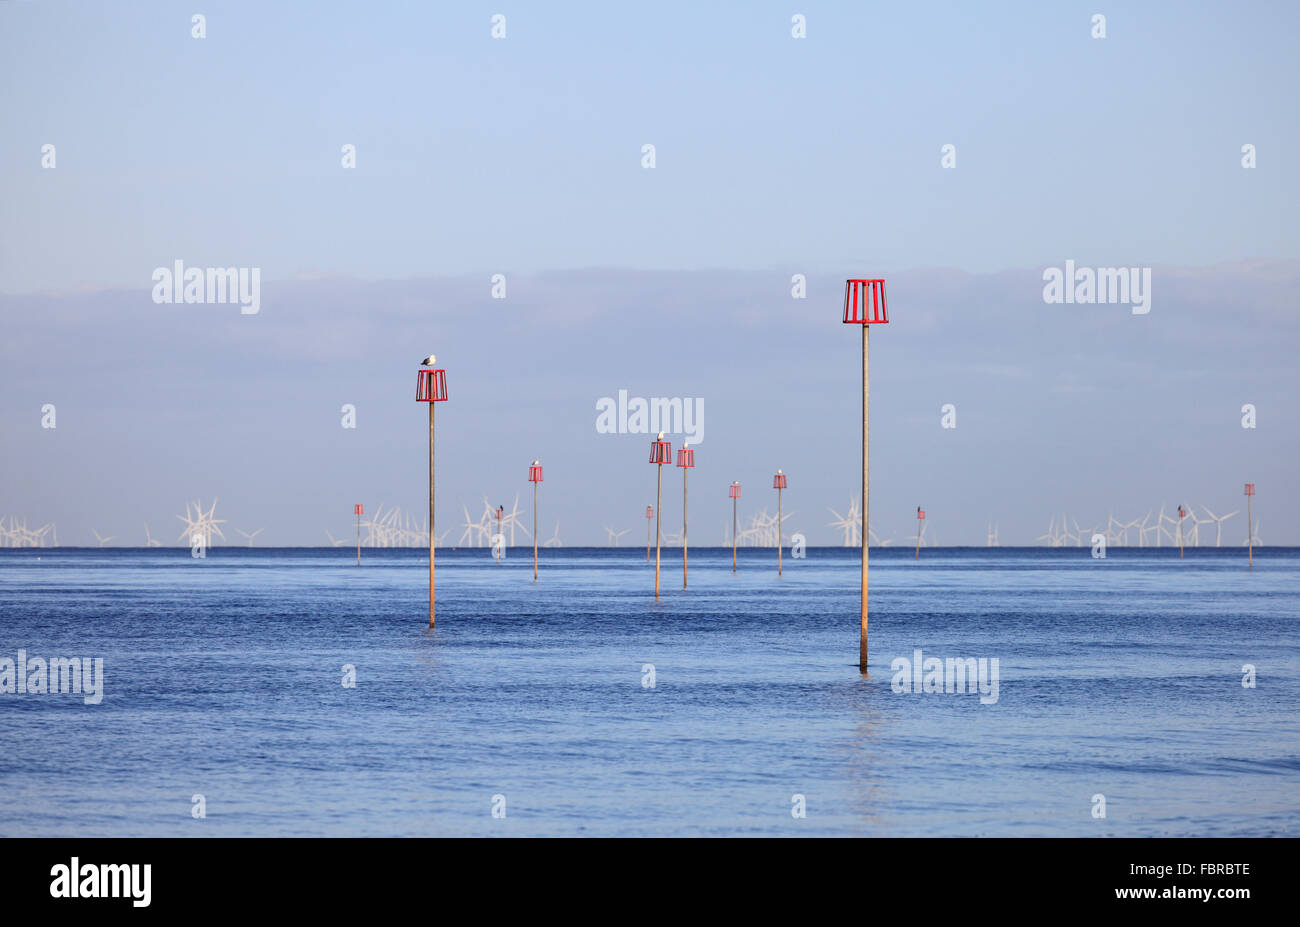 Markers for submerged groynes and wind turbines in a calm blue sea. Stock Photo